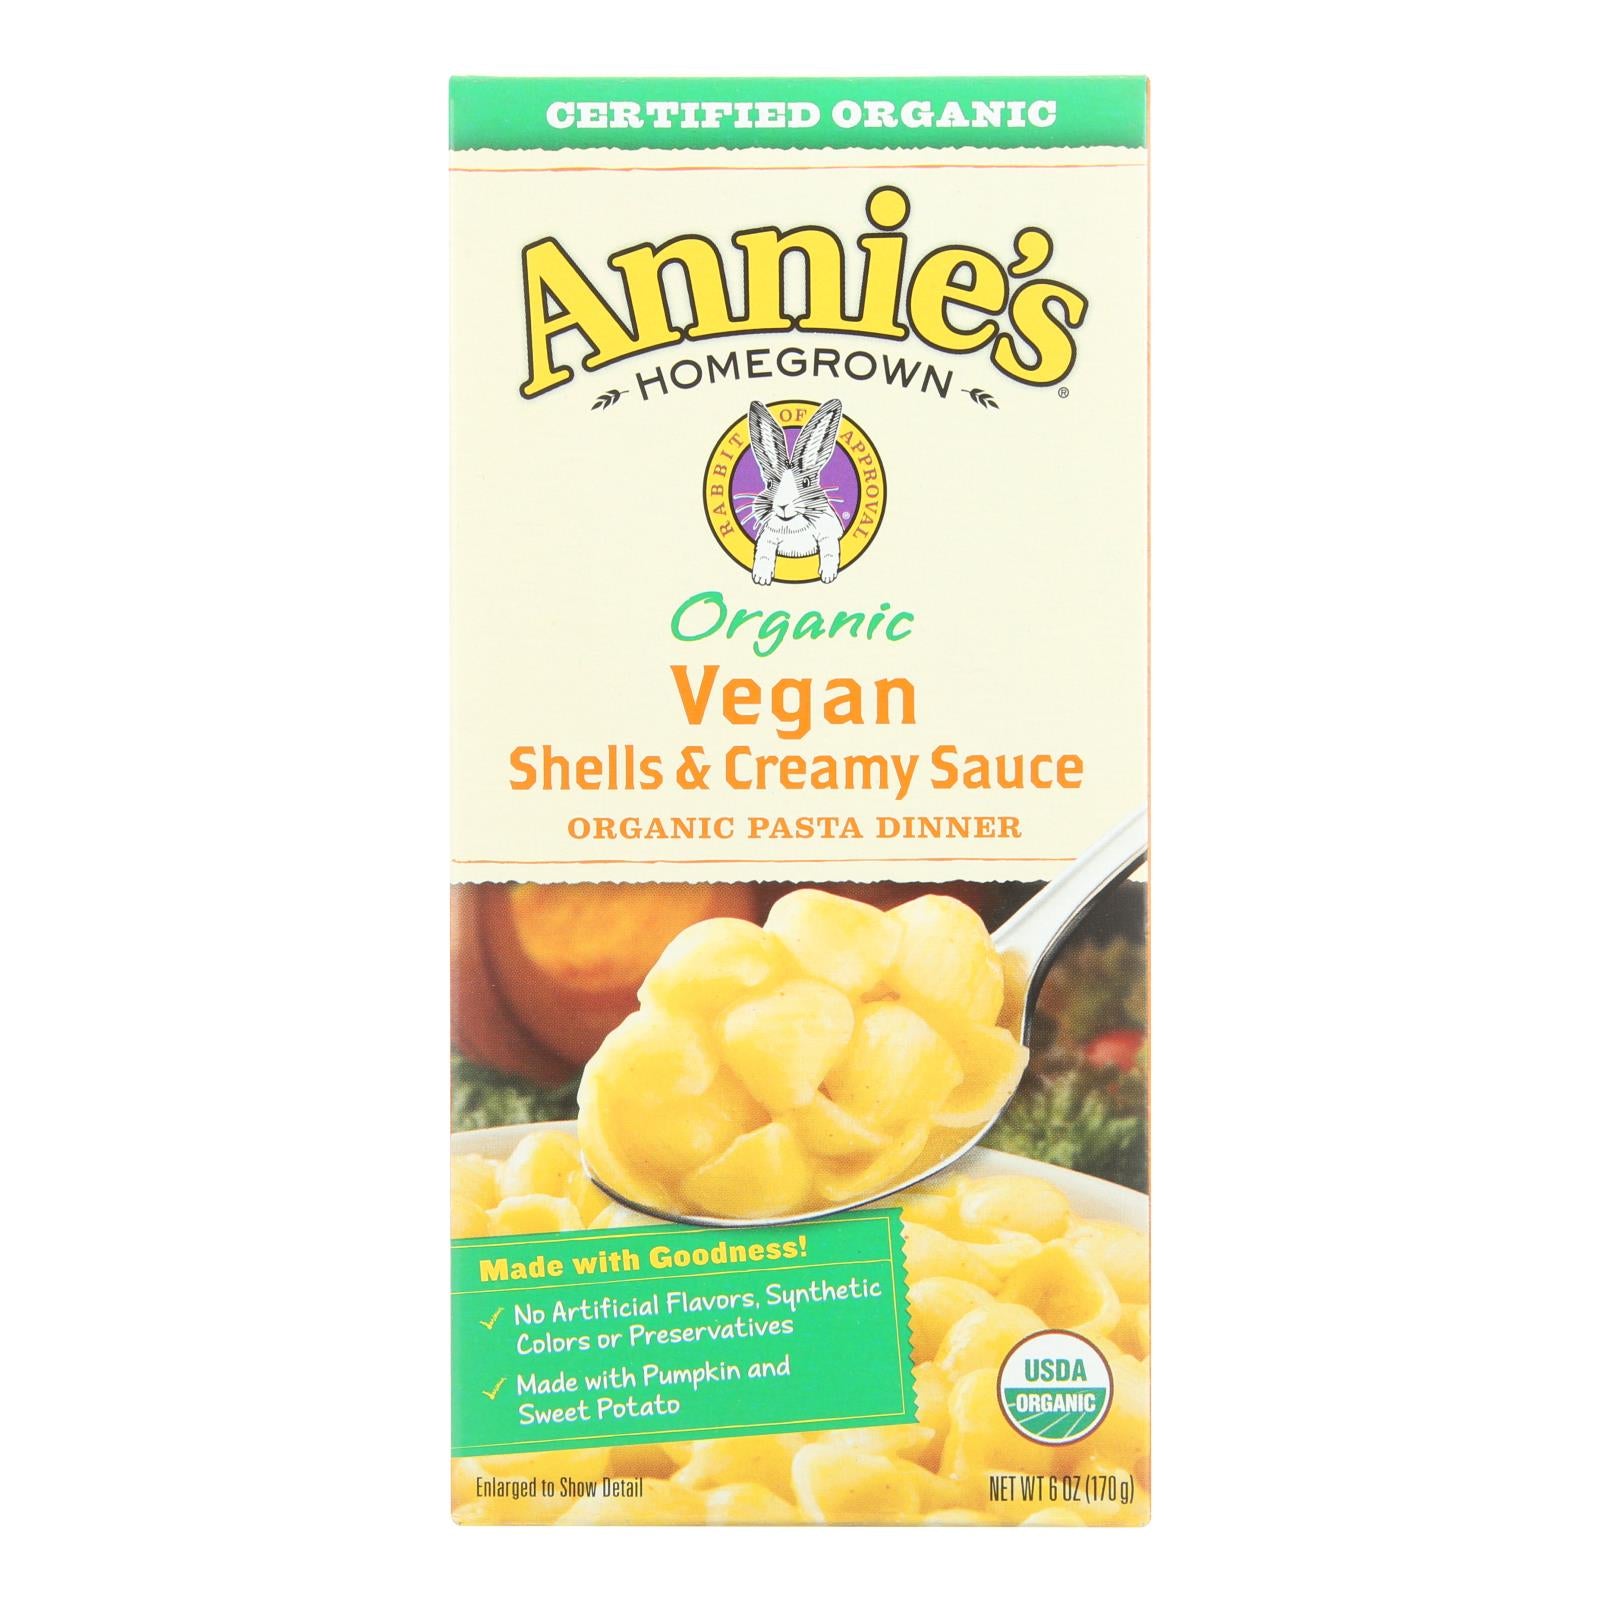 Annie'S Homegrown, Annie's Homegrown Organic Vegan Shells and Creamy Sauce Pasta Dinner - Case of 12 - 6 oz. (Pack of 12)